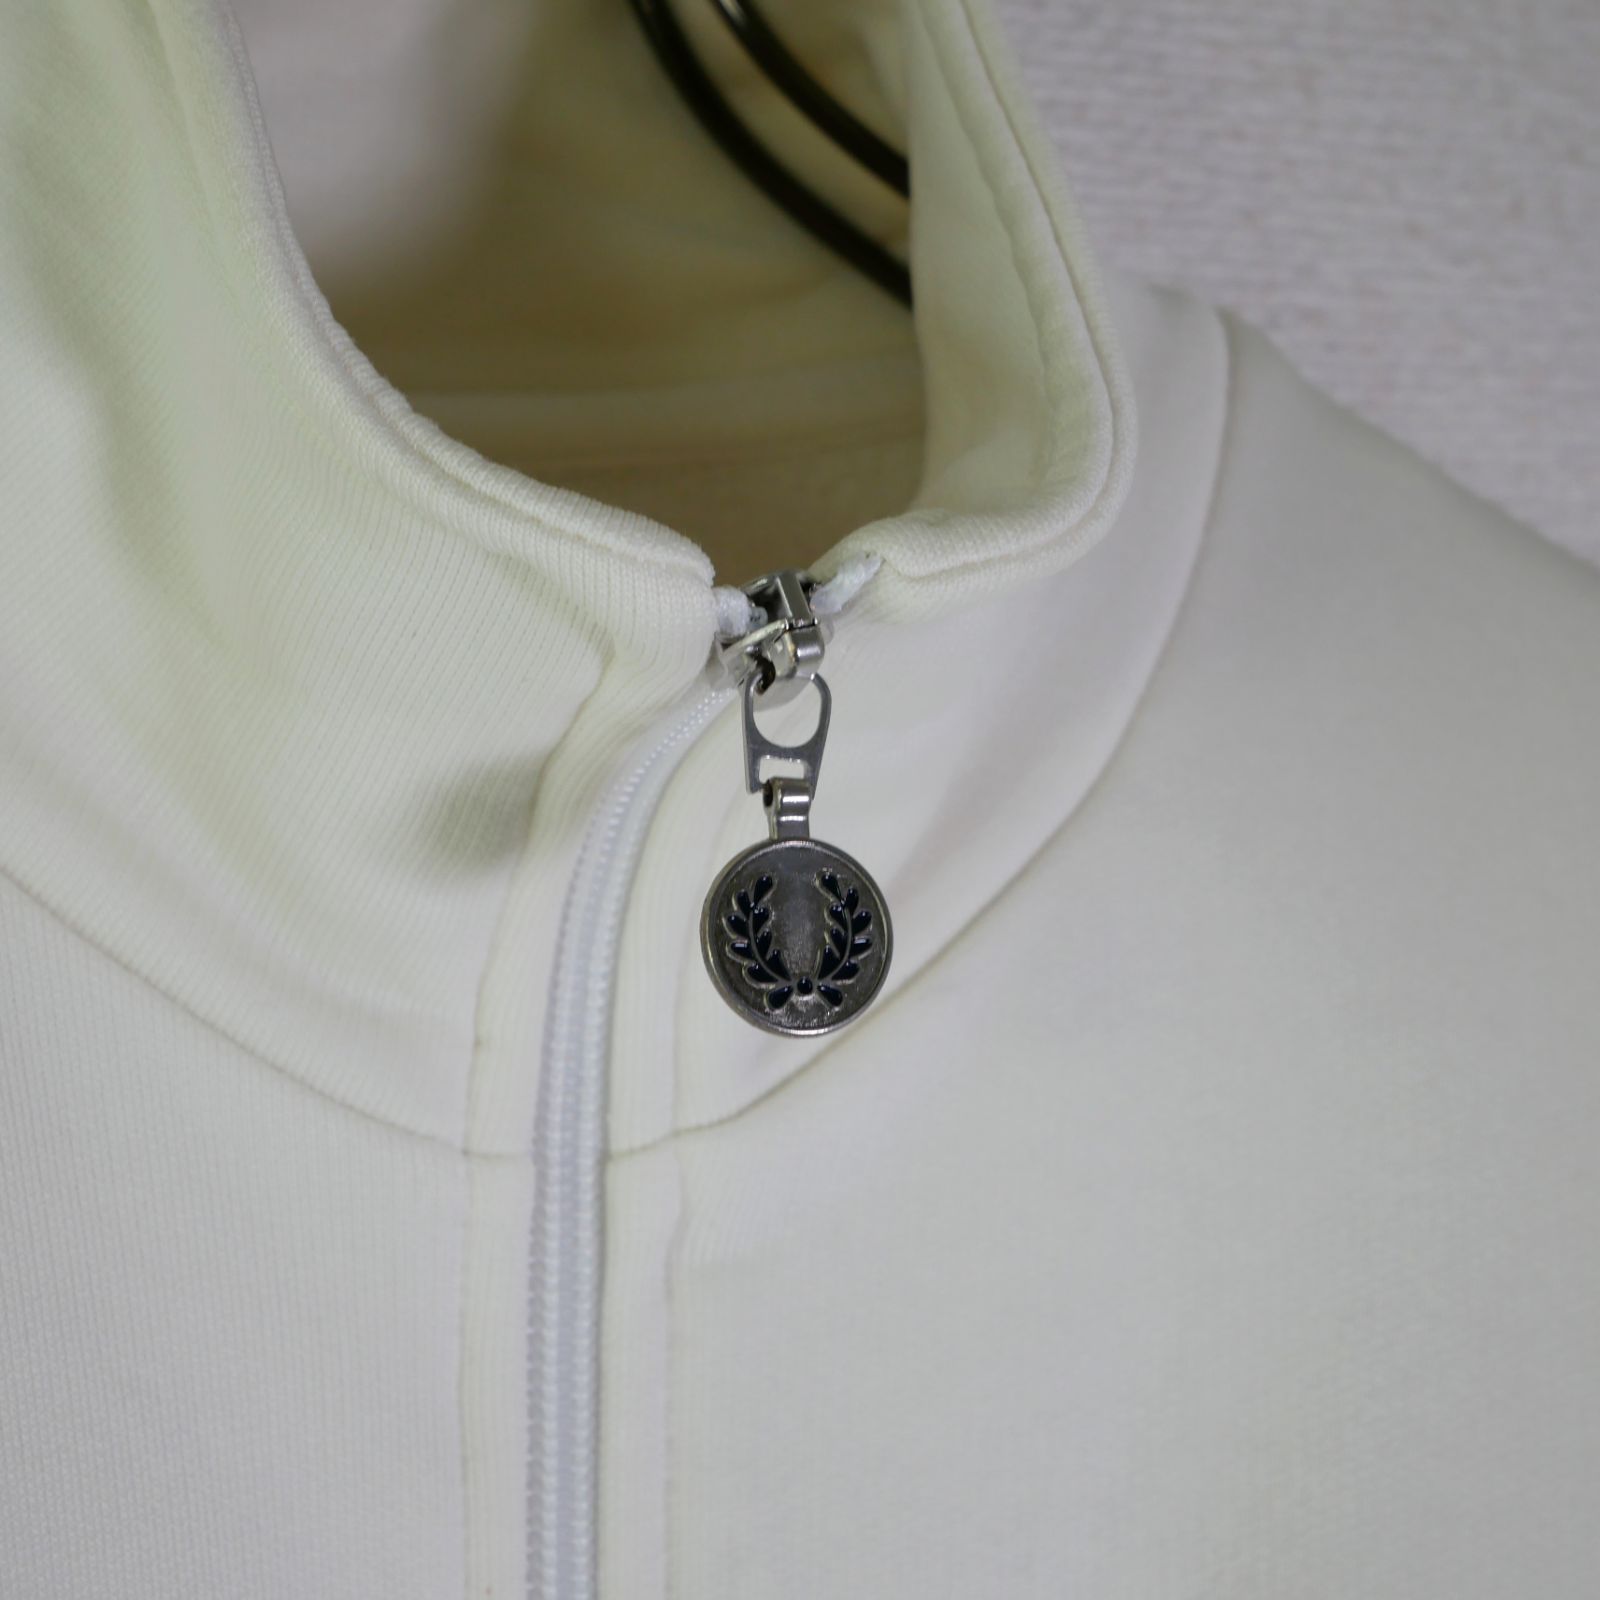 FRED PERRY OFF-WHITEカラー King Gnu 新井和輝着用MODEL Track JKT 